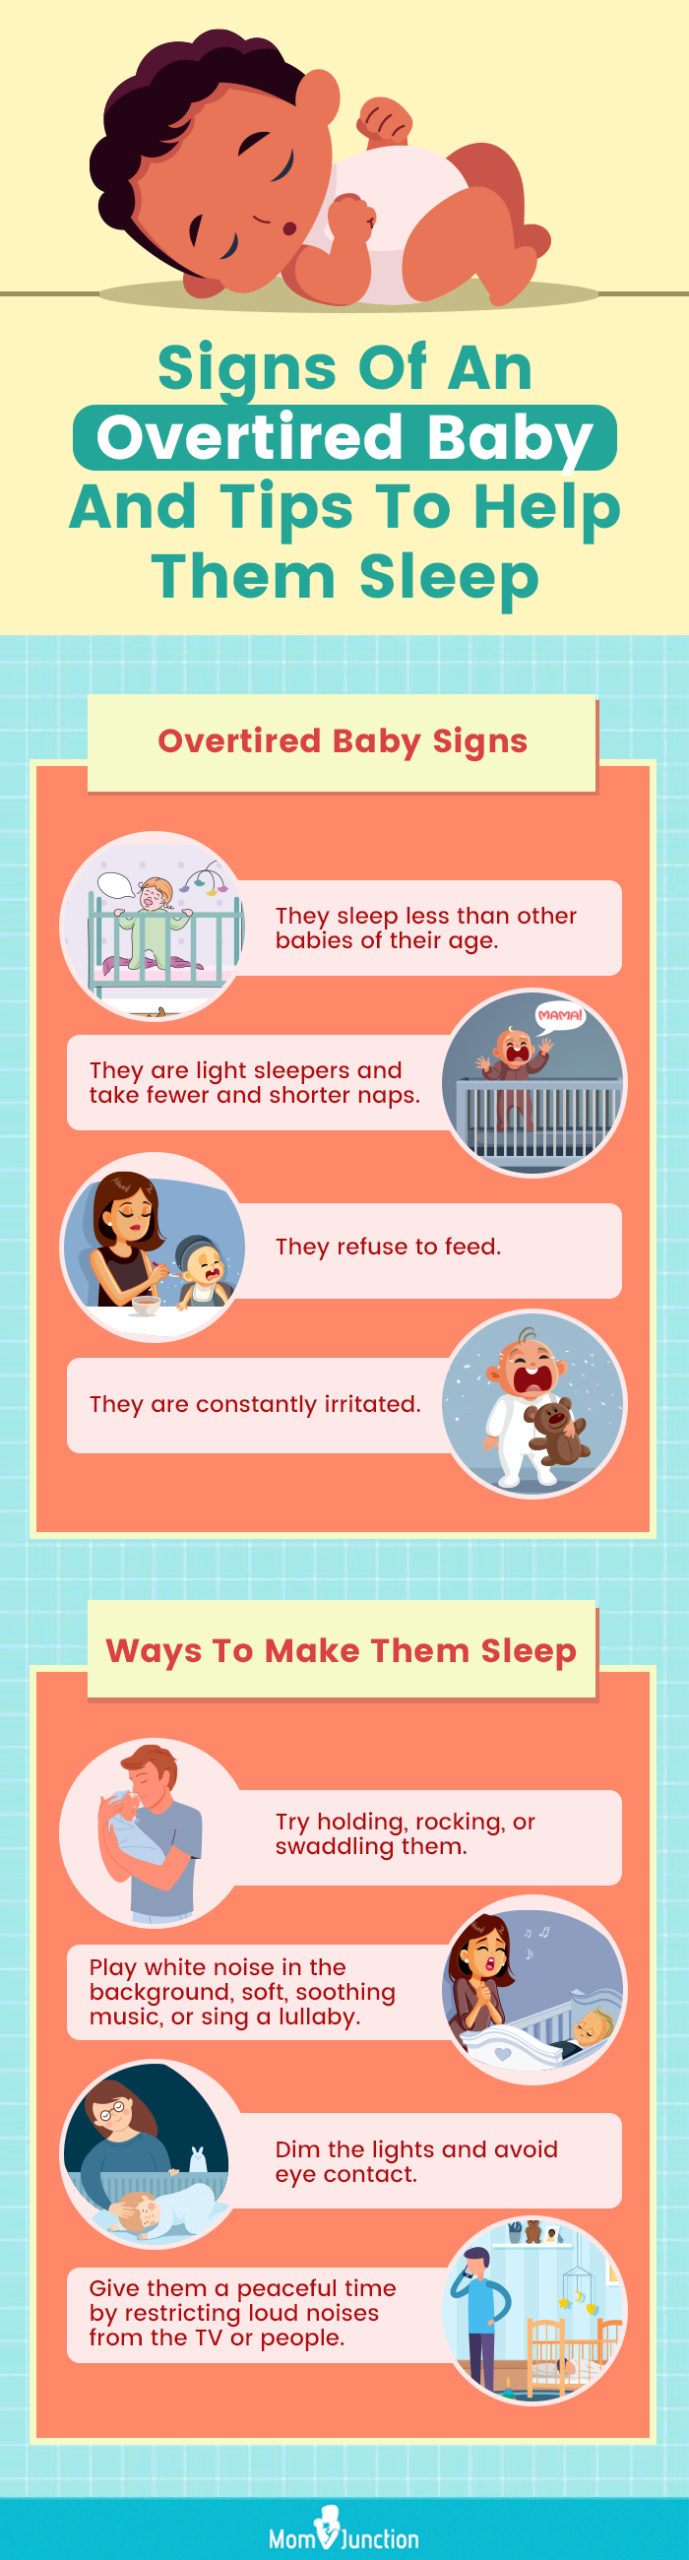 How to Break the Cycle of an Overtired Baby: Soothing Strategies